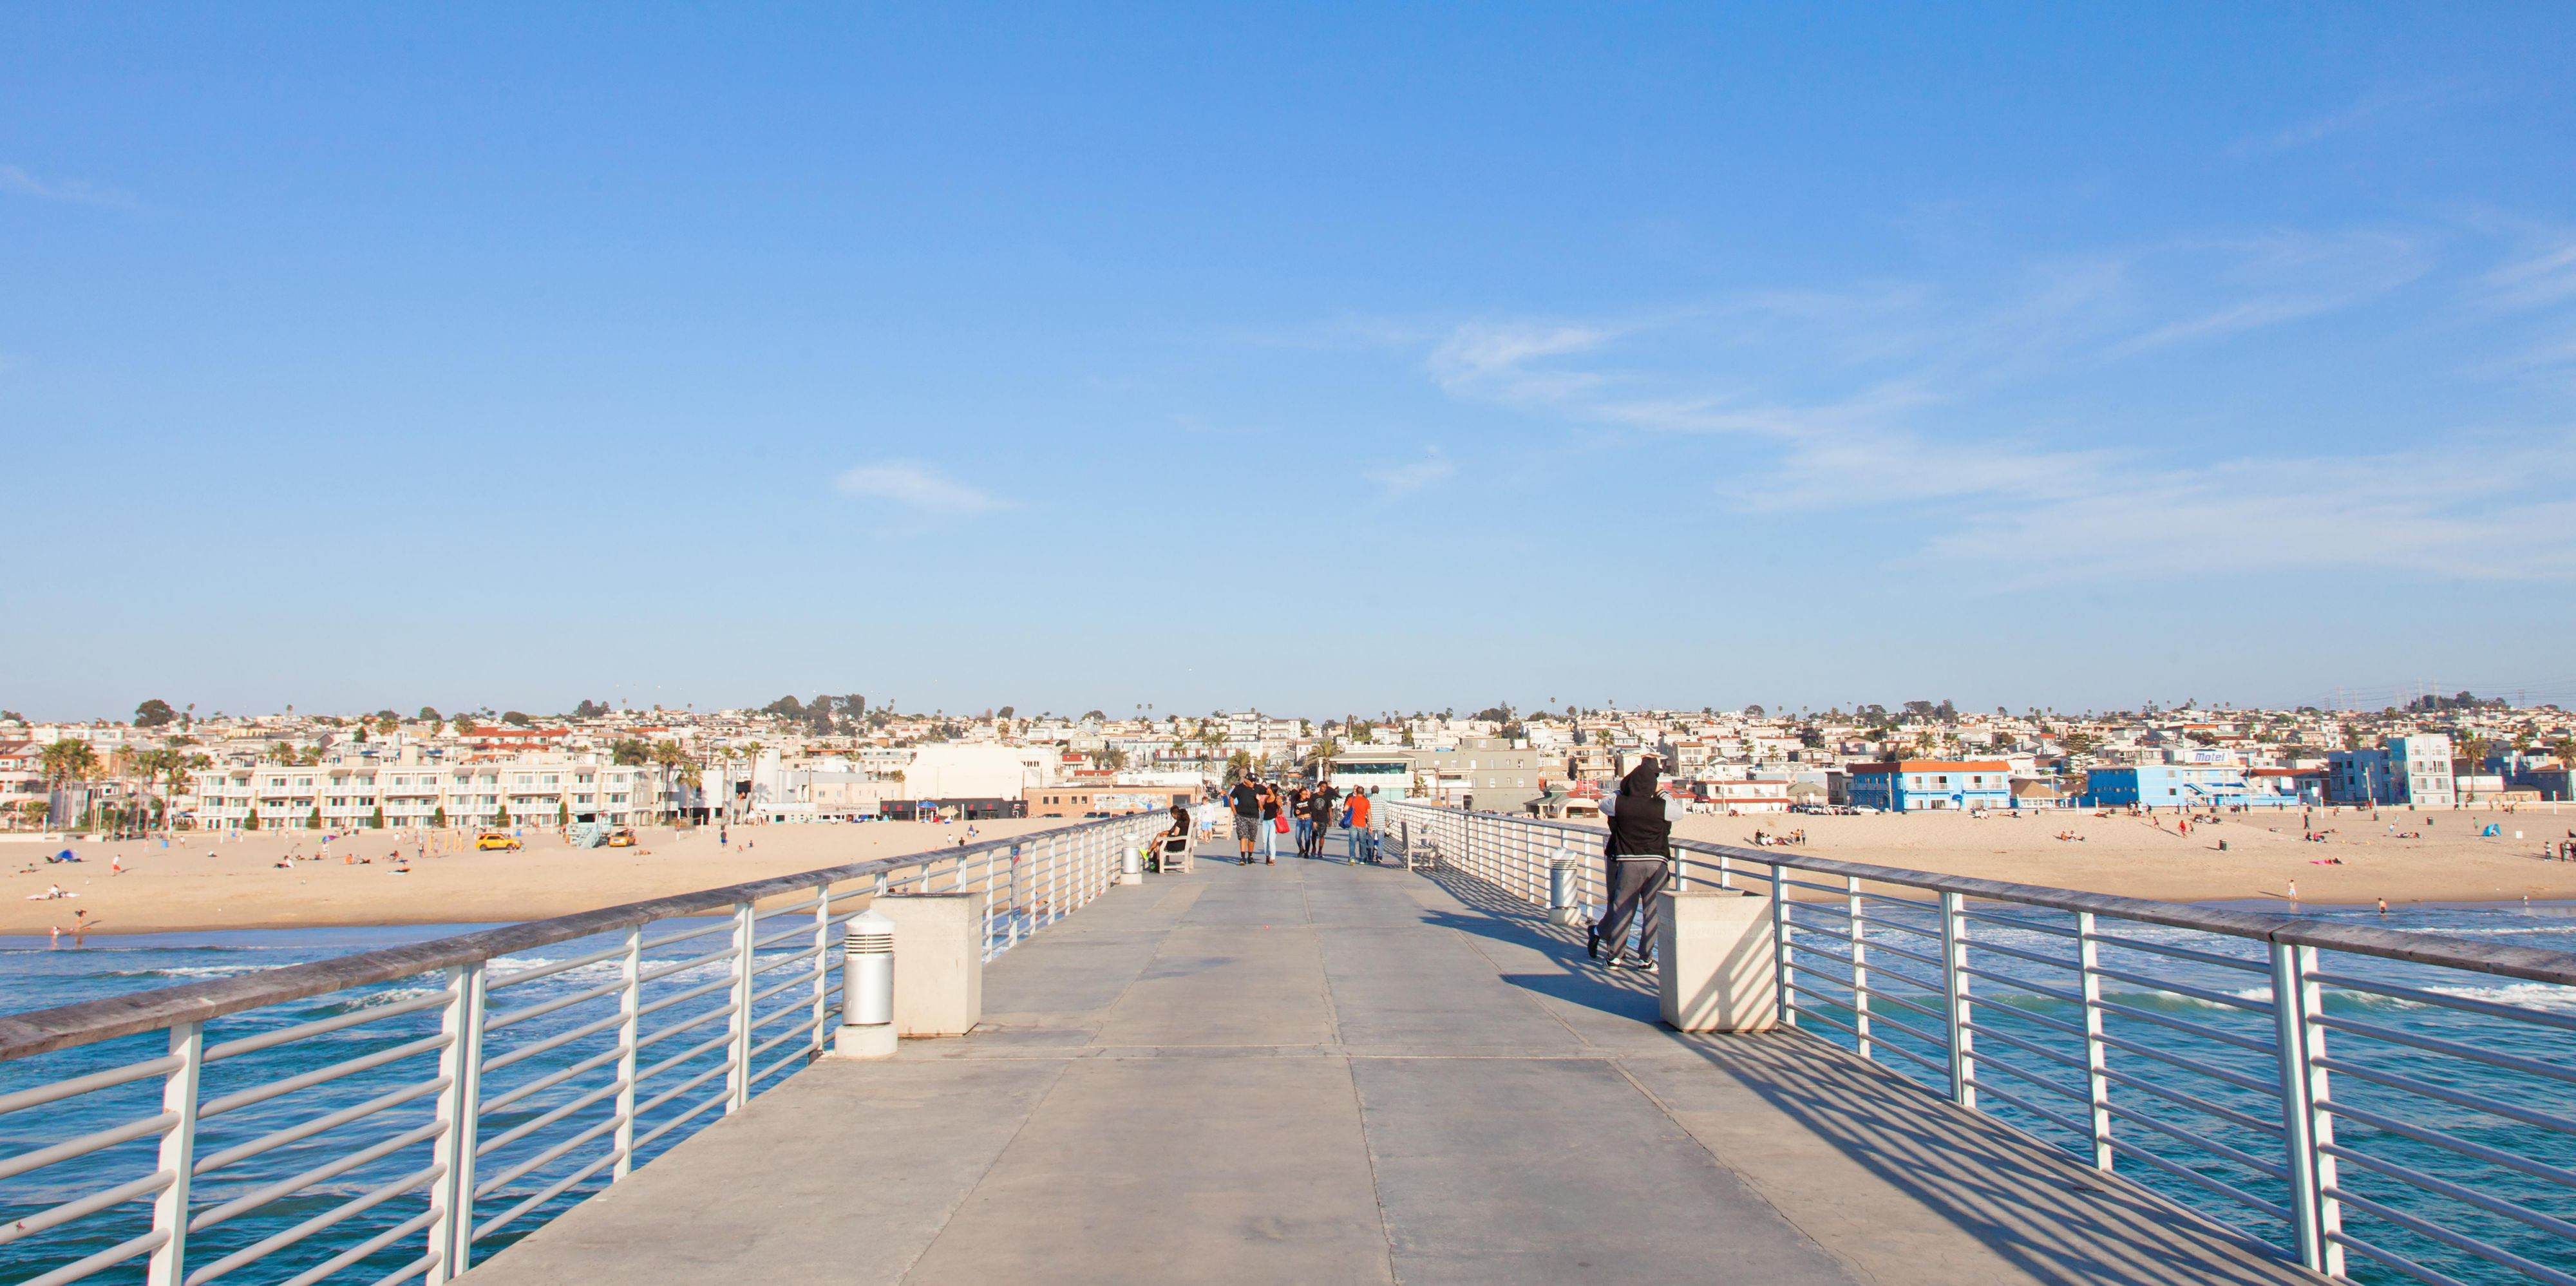 You choose from Hermosa Beach or Redondo Beach, both are just minutes away from the property.